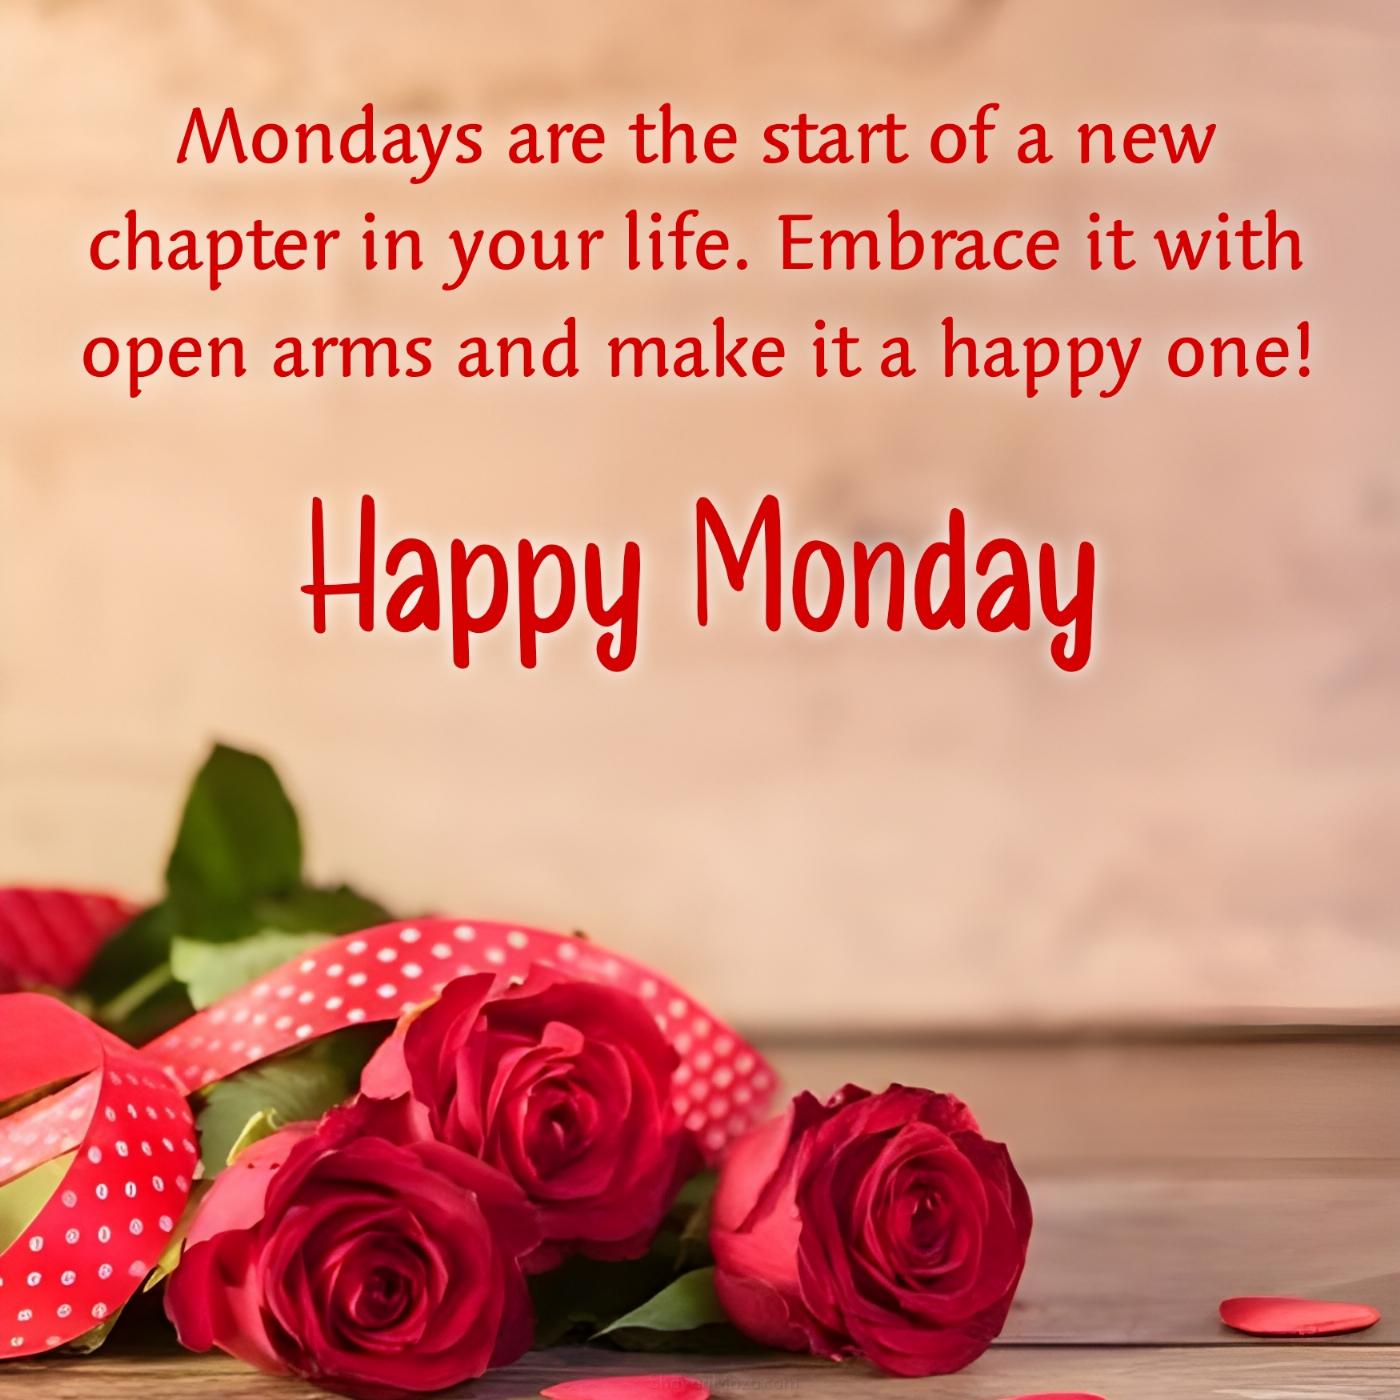 Mondays are the start of a new chapter in your life